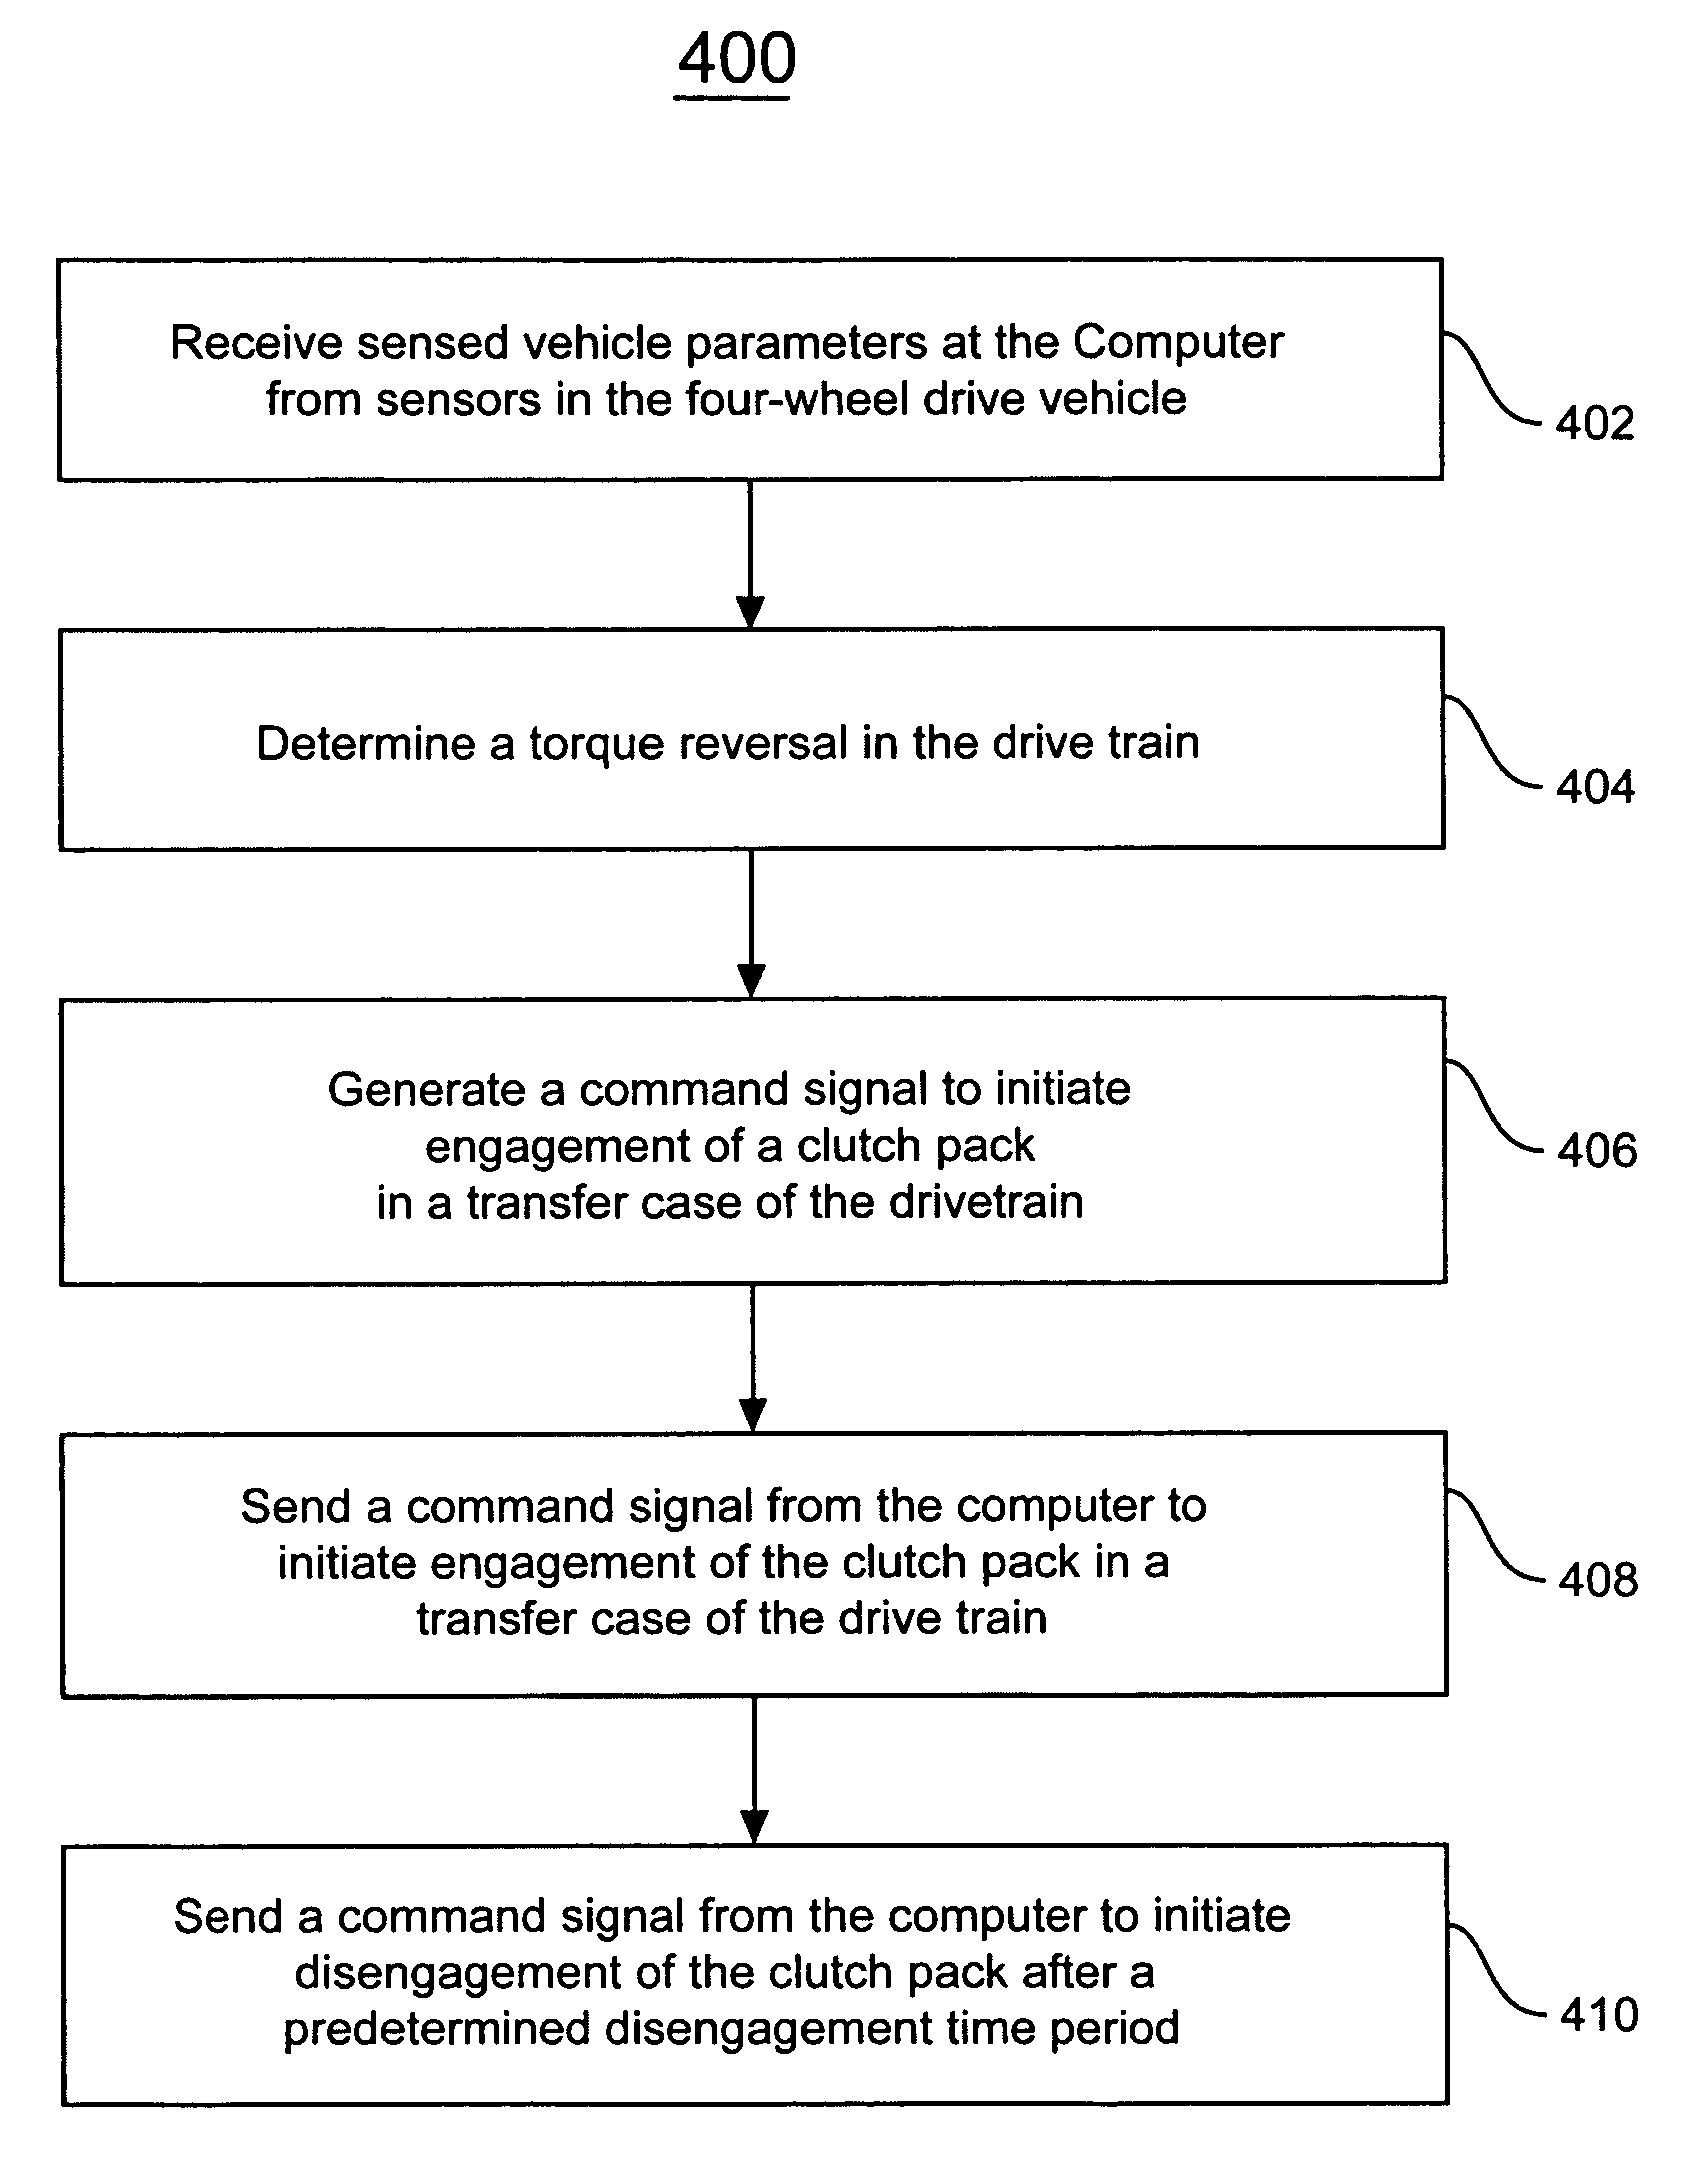 Method to reduce backlash in a drive train